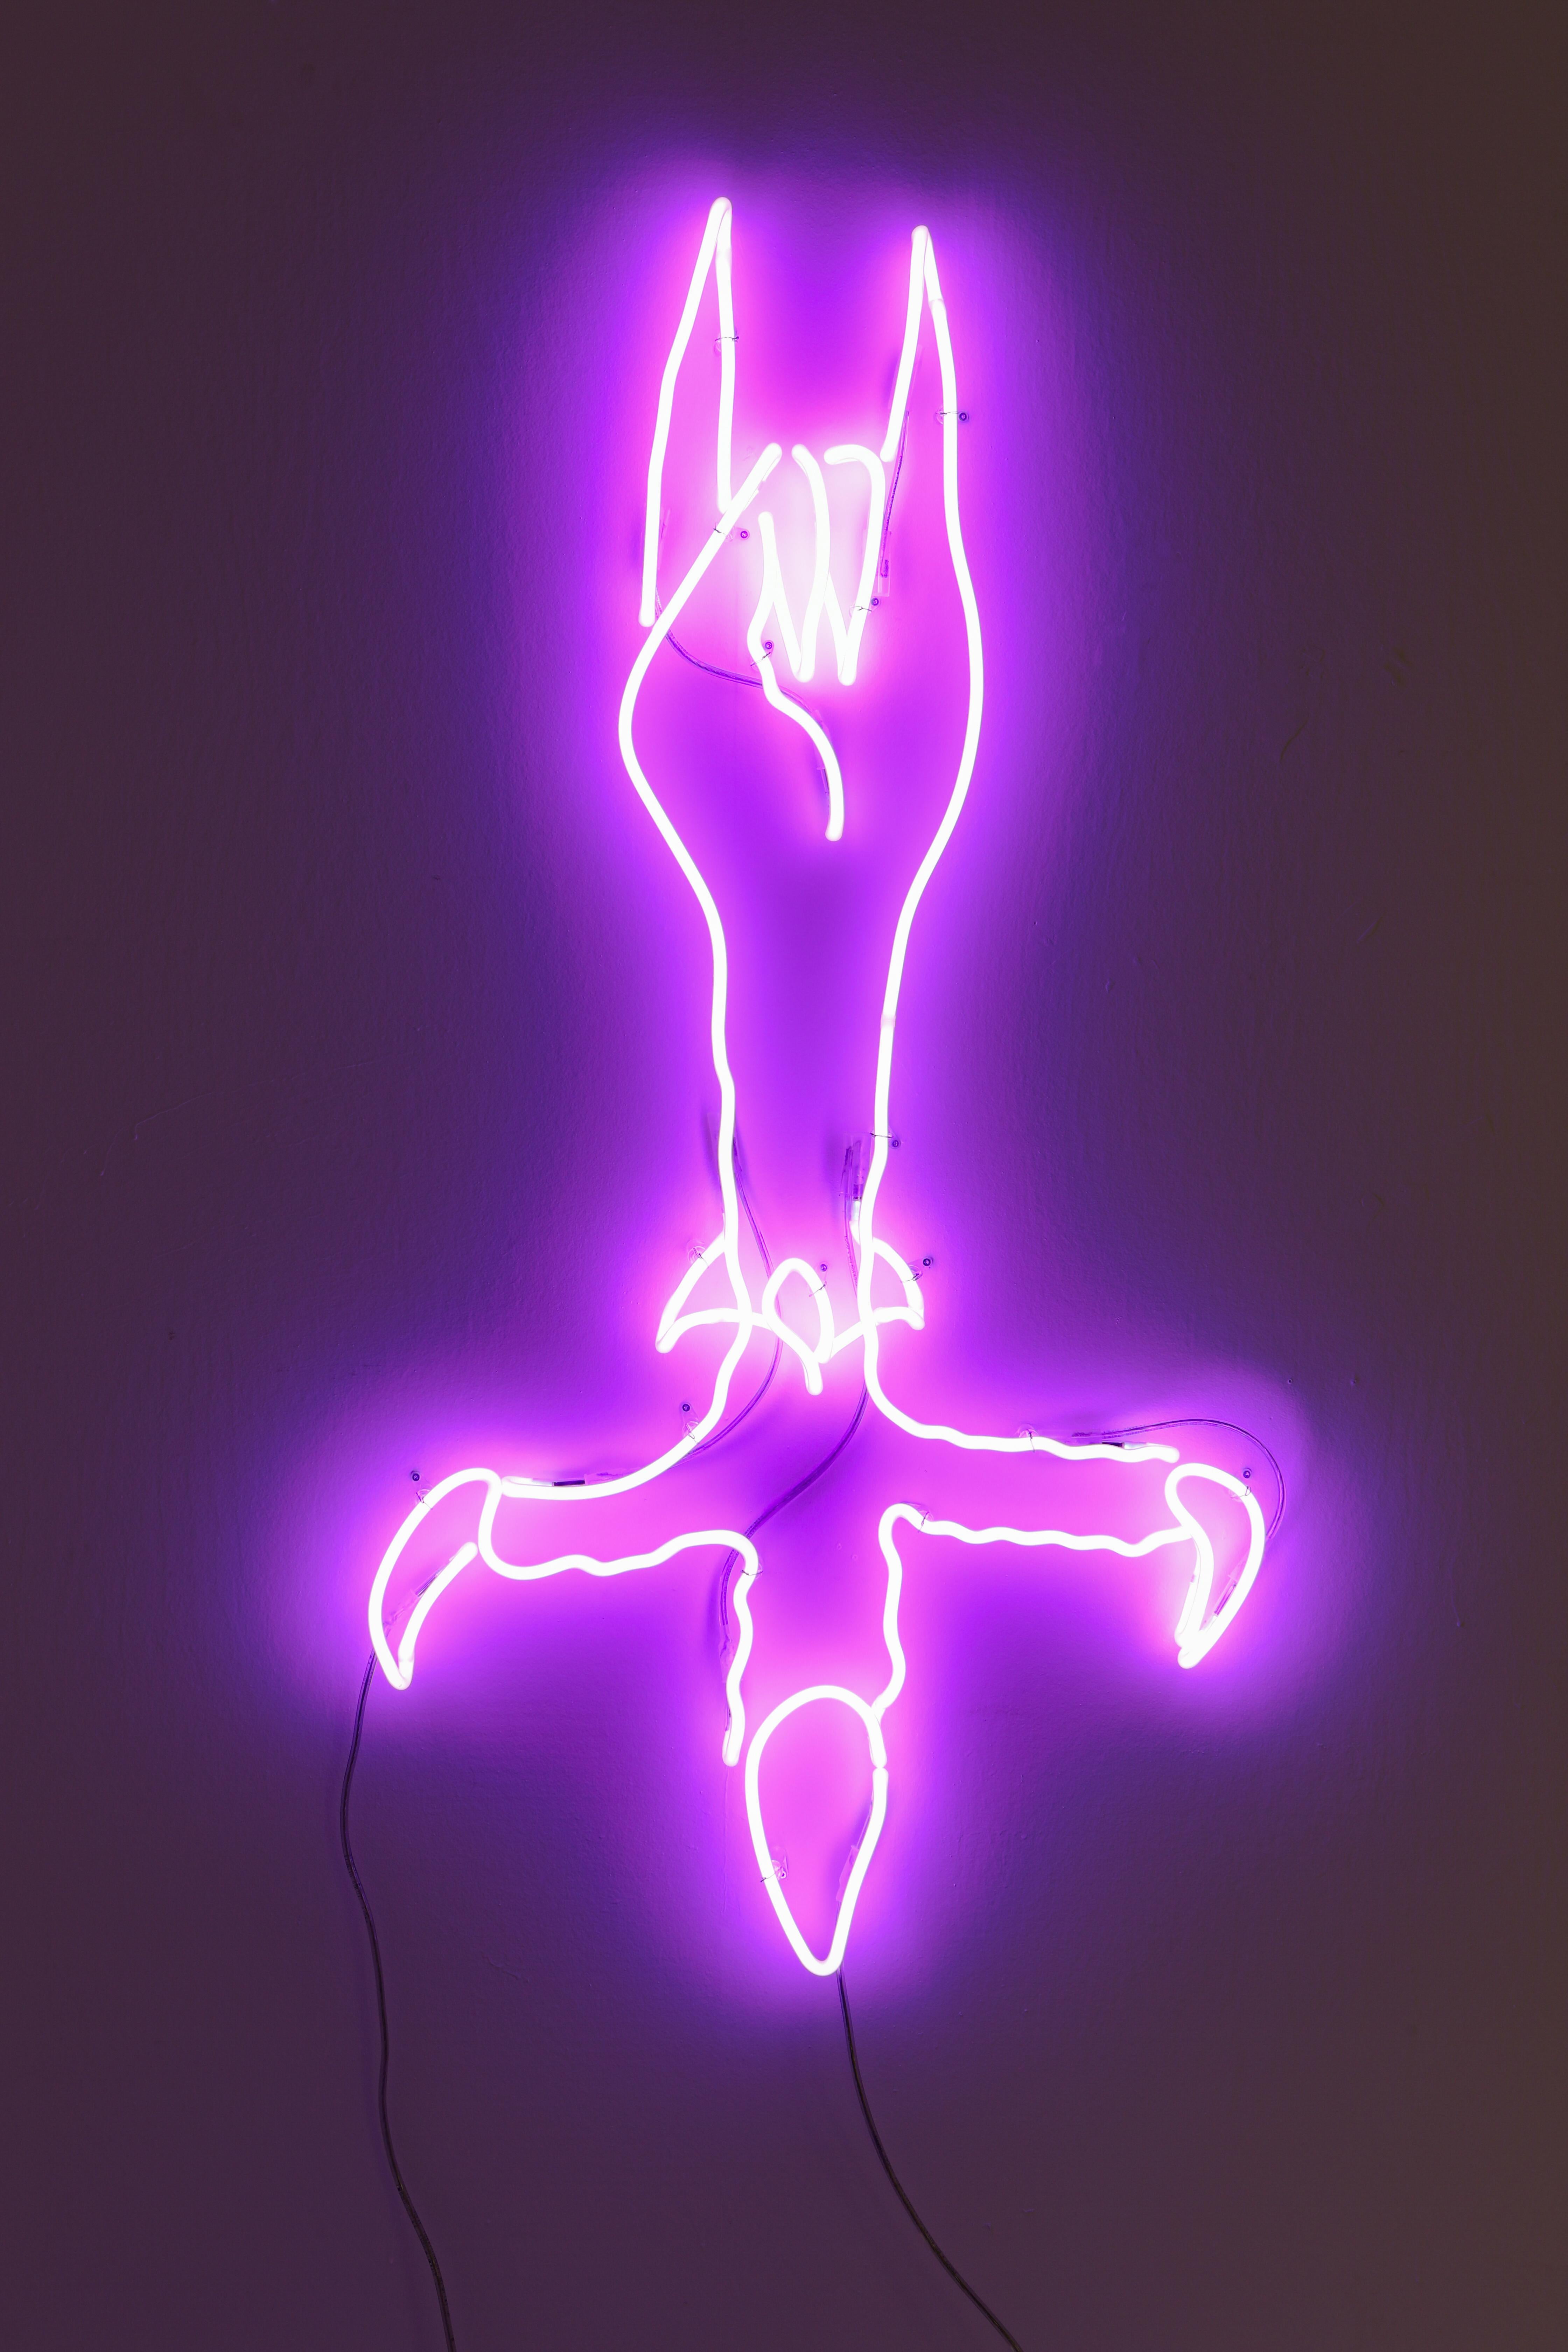 The 'BATHORY' neon wall light is a striking functional art piece by Belgian contemporary artist, Daan Gielis. 'BATHORY' was exhibited in the group exhibition 'LIMBO' at Everyday Gallery in Antwerp, Belgium.

